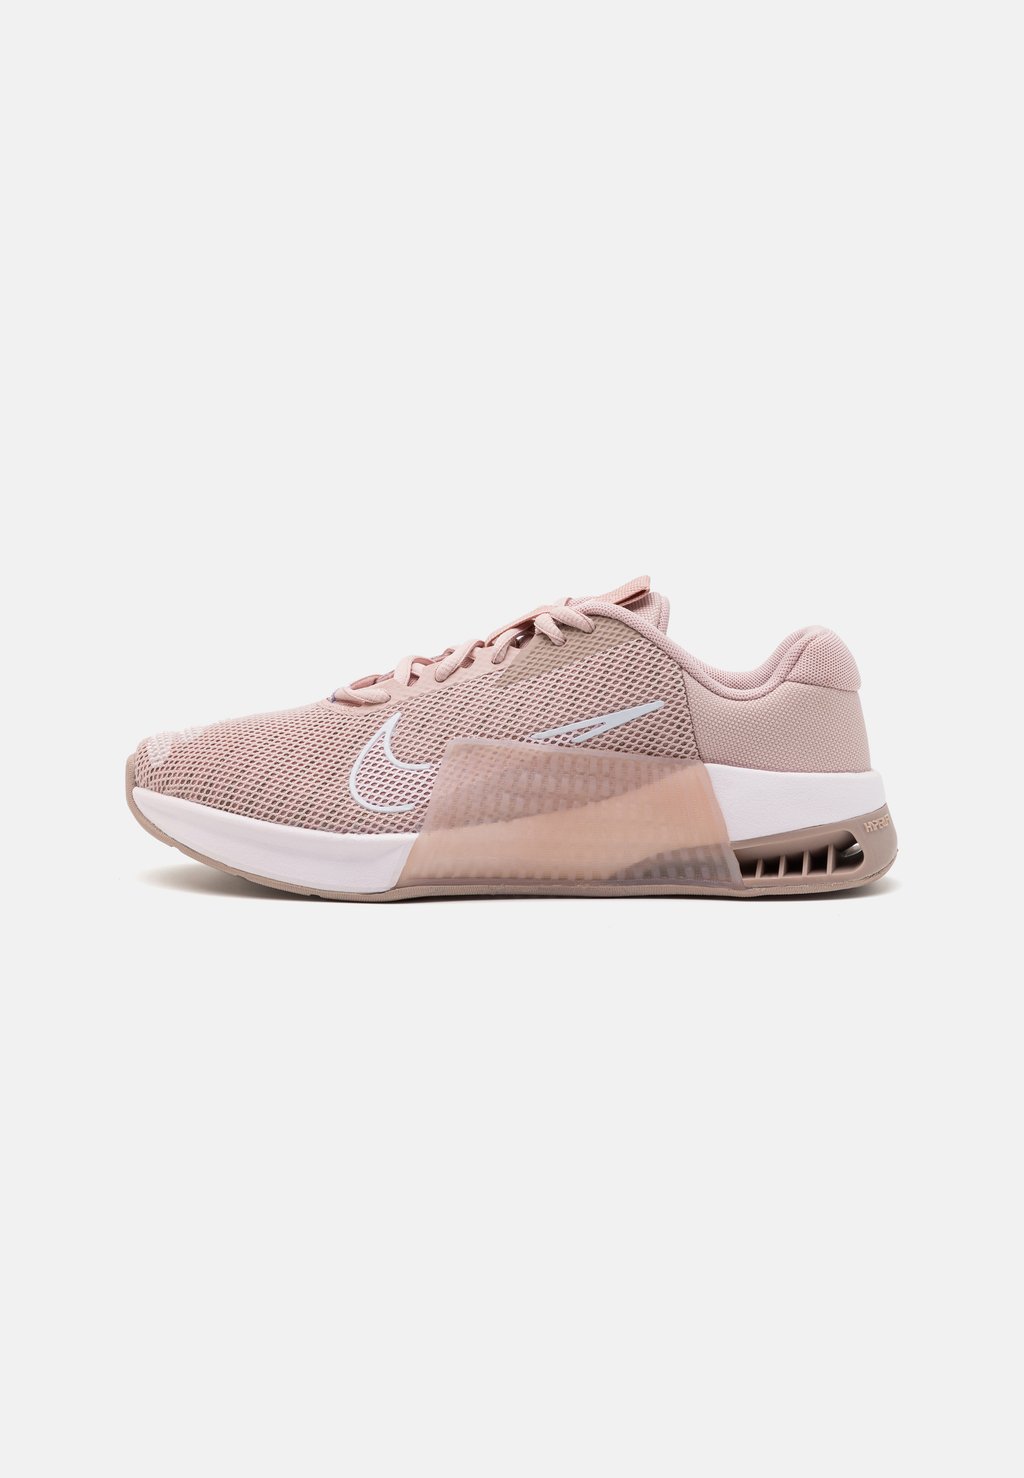 Кроссовки METCON 9 Nike, цвет pink oxford/white/diffused taupe/pearl pink